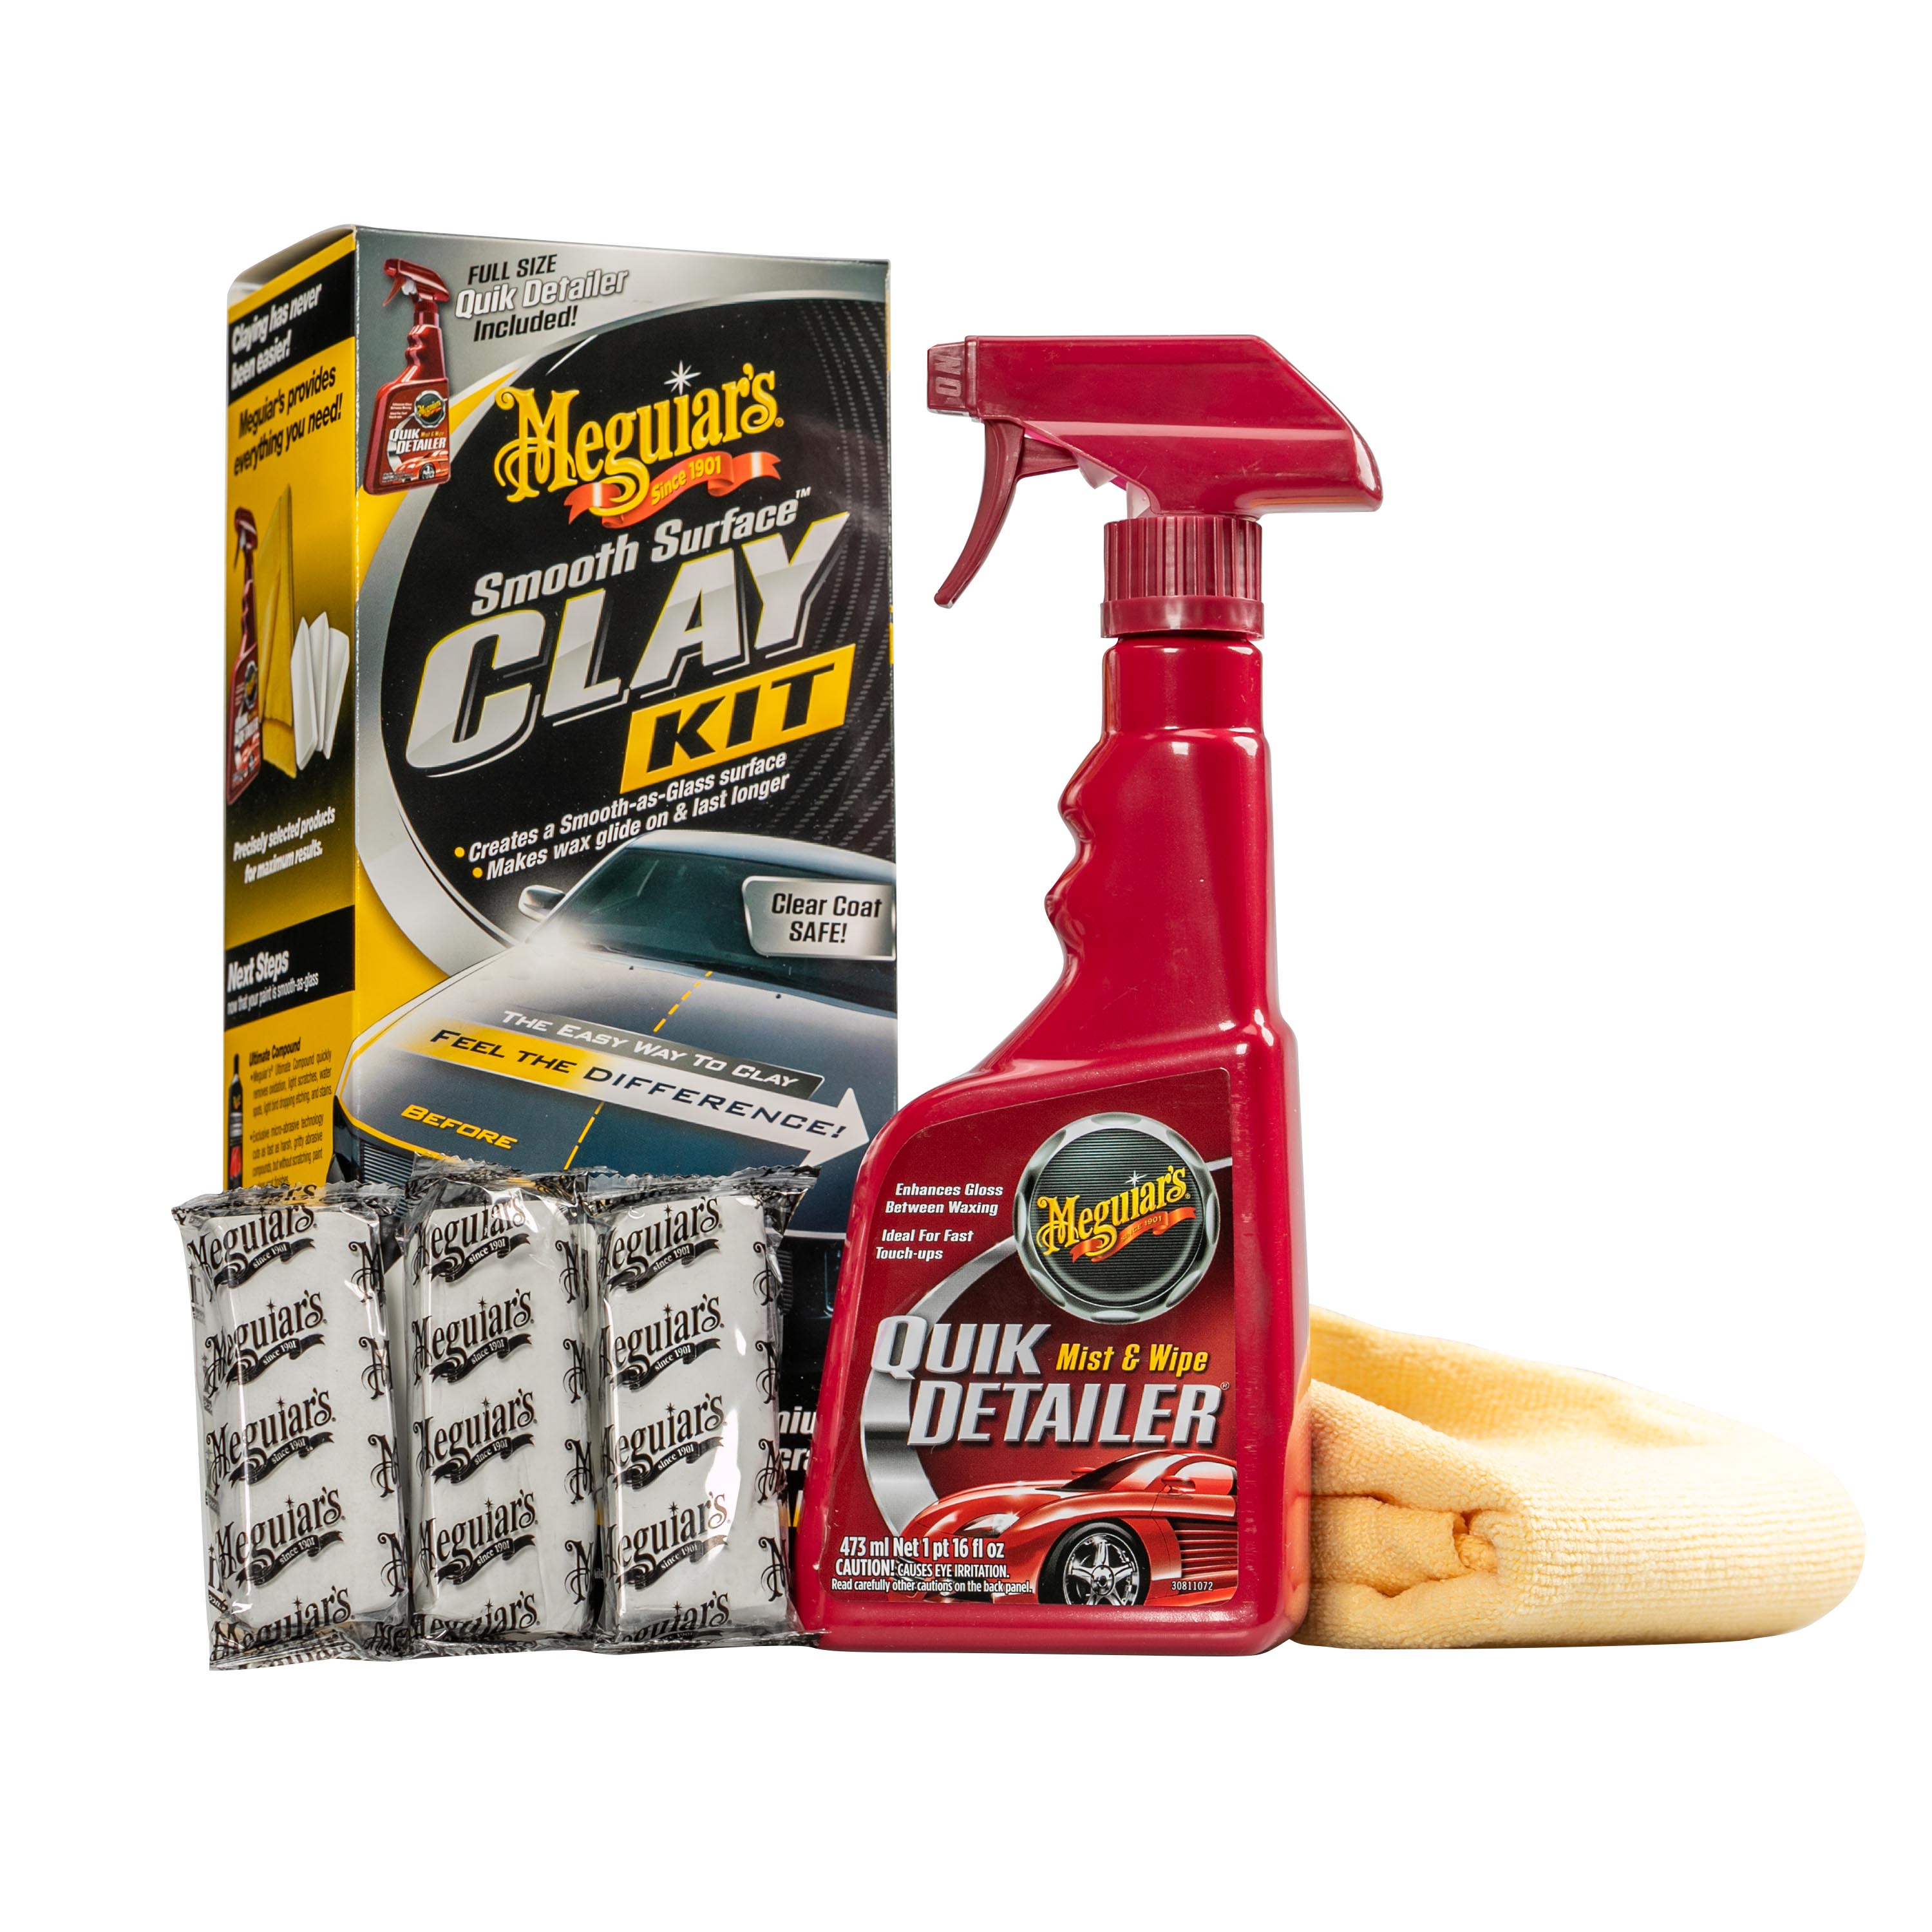  Nu Finish Quick Clay Car Kit with Clay Block, 5-in-1 Detailer  and Cloth (3 Items) : Automotive